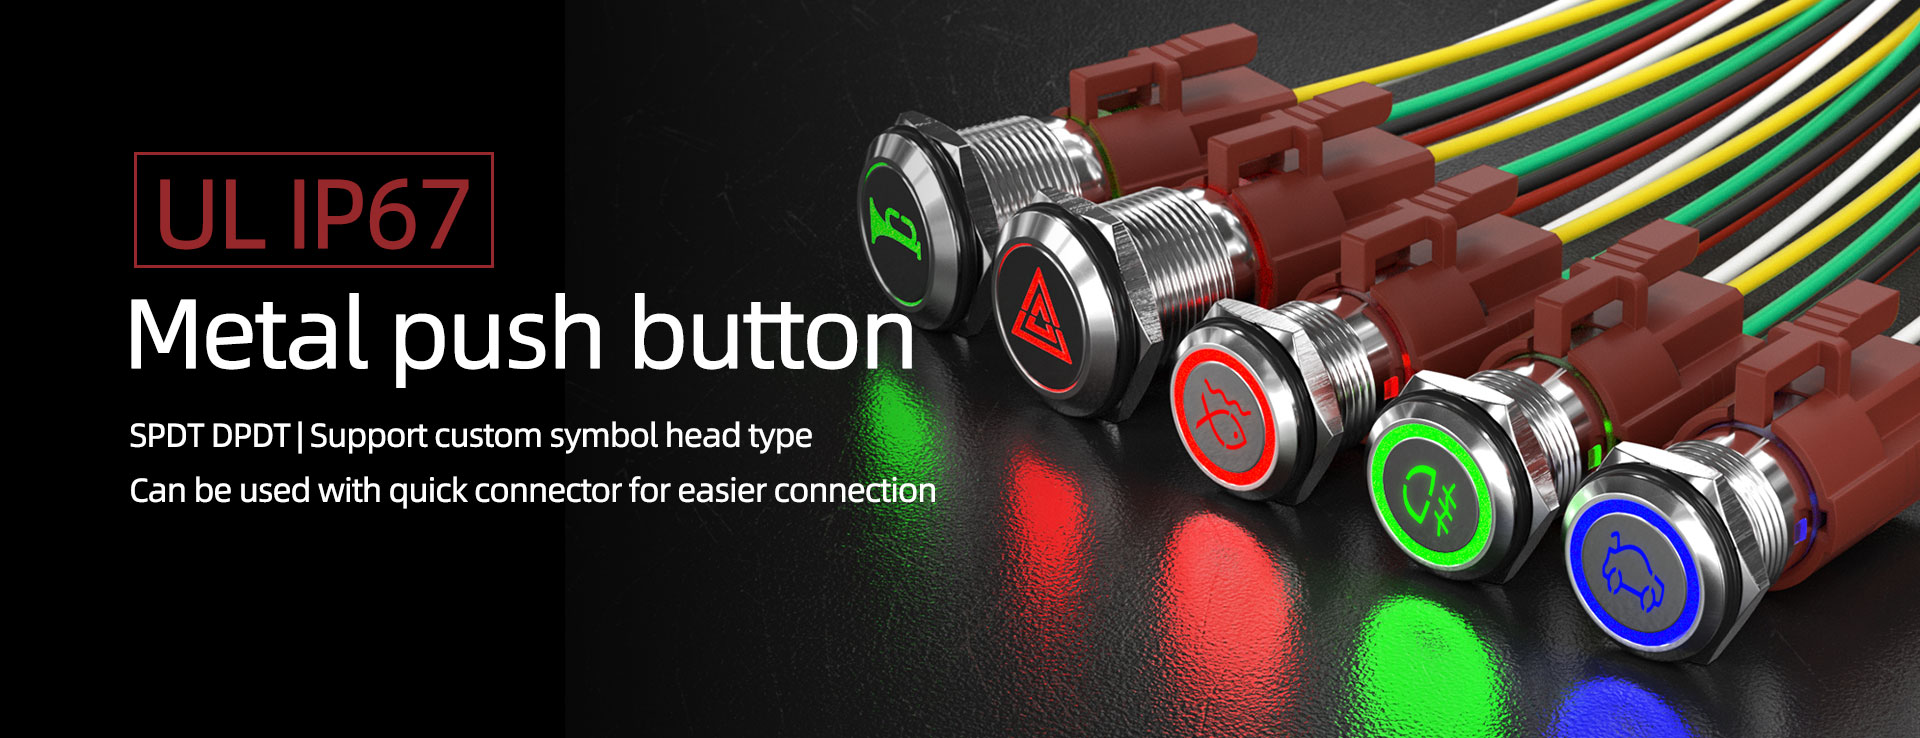 UL Metal push button switches